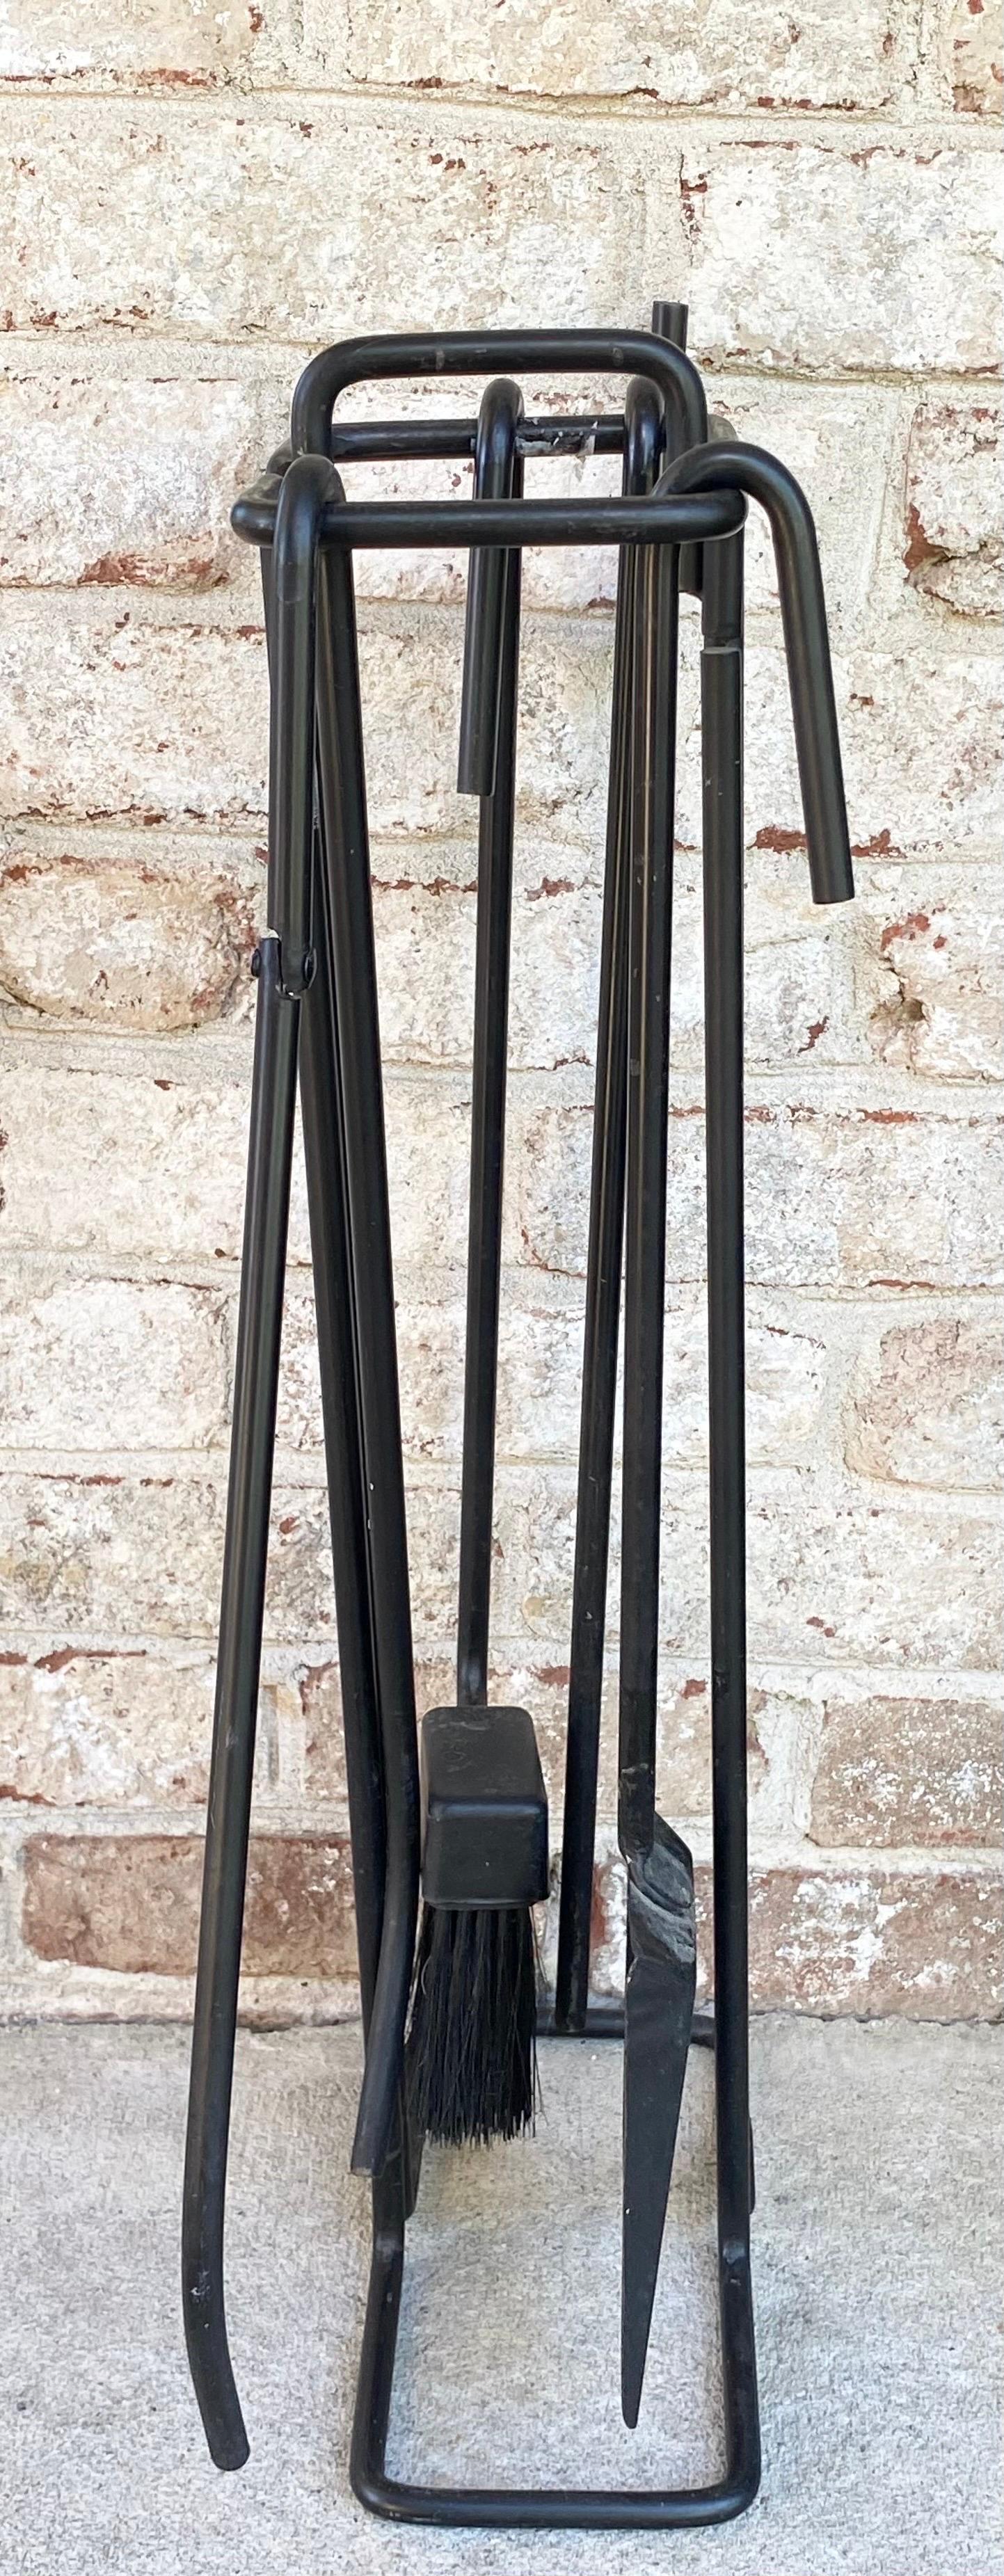 Ann Maes set of fireplace tools.... in the modernist style....

The measurements for the stand are 26.5